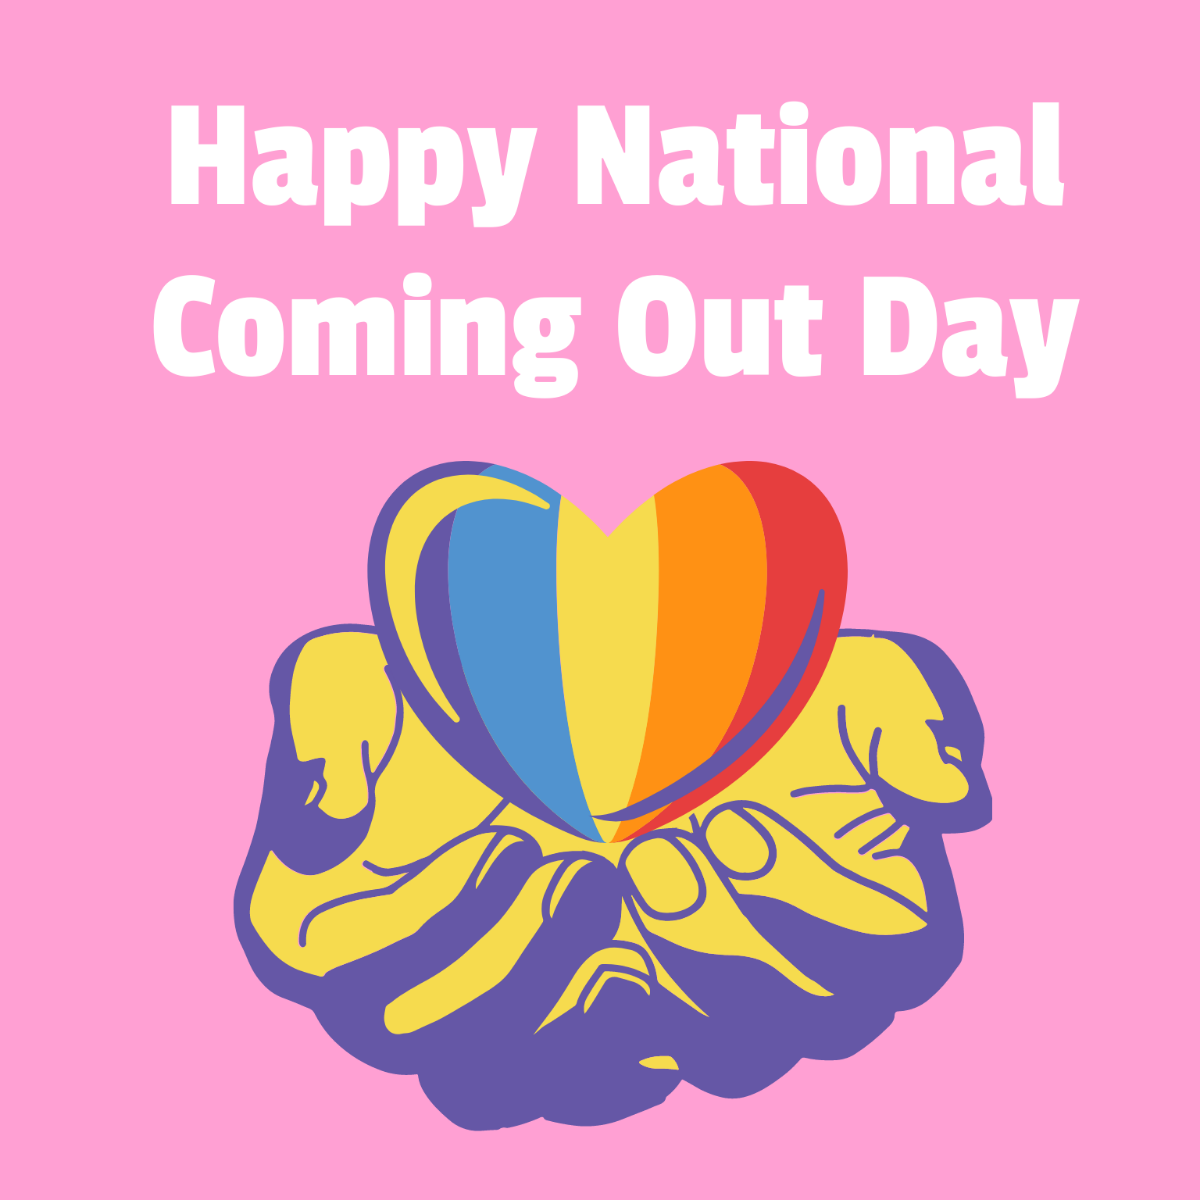 Free Happy National Coming Out Day Illustration Template